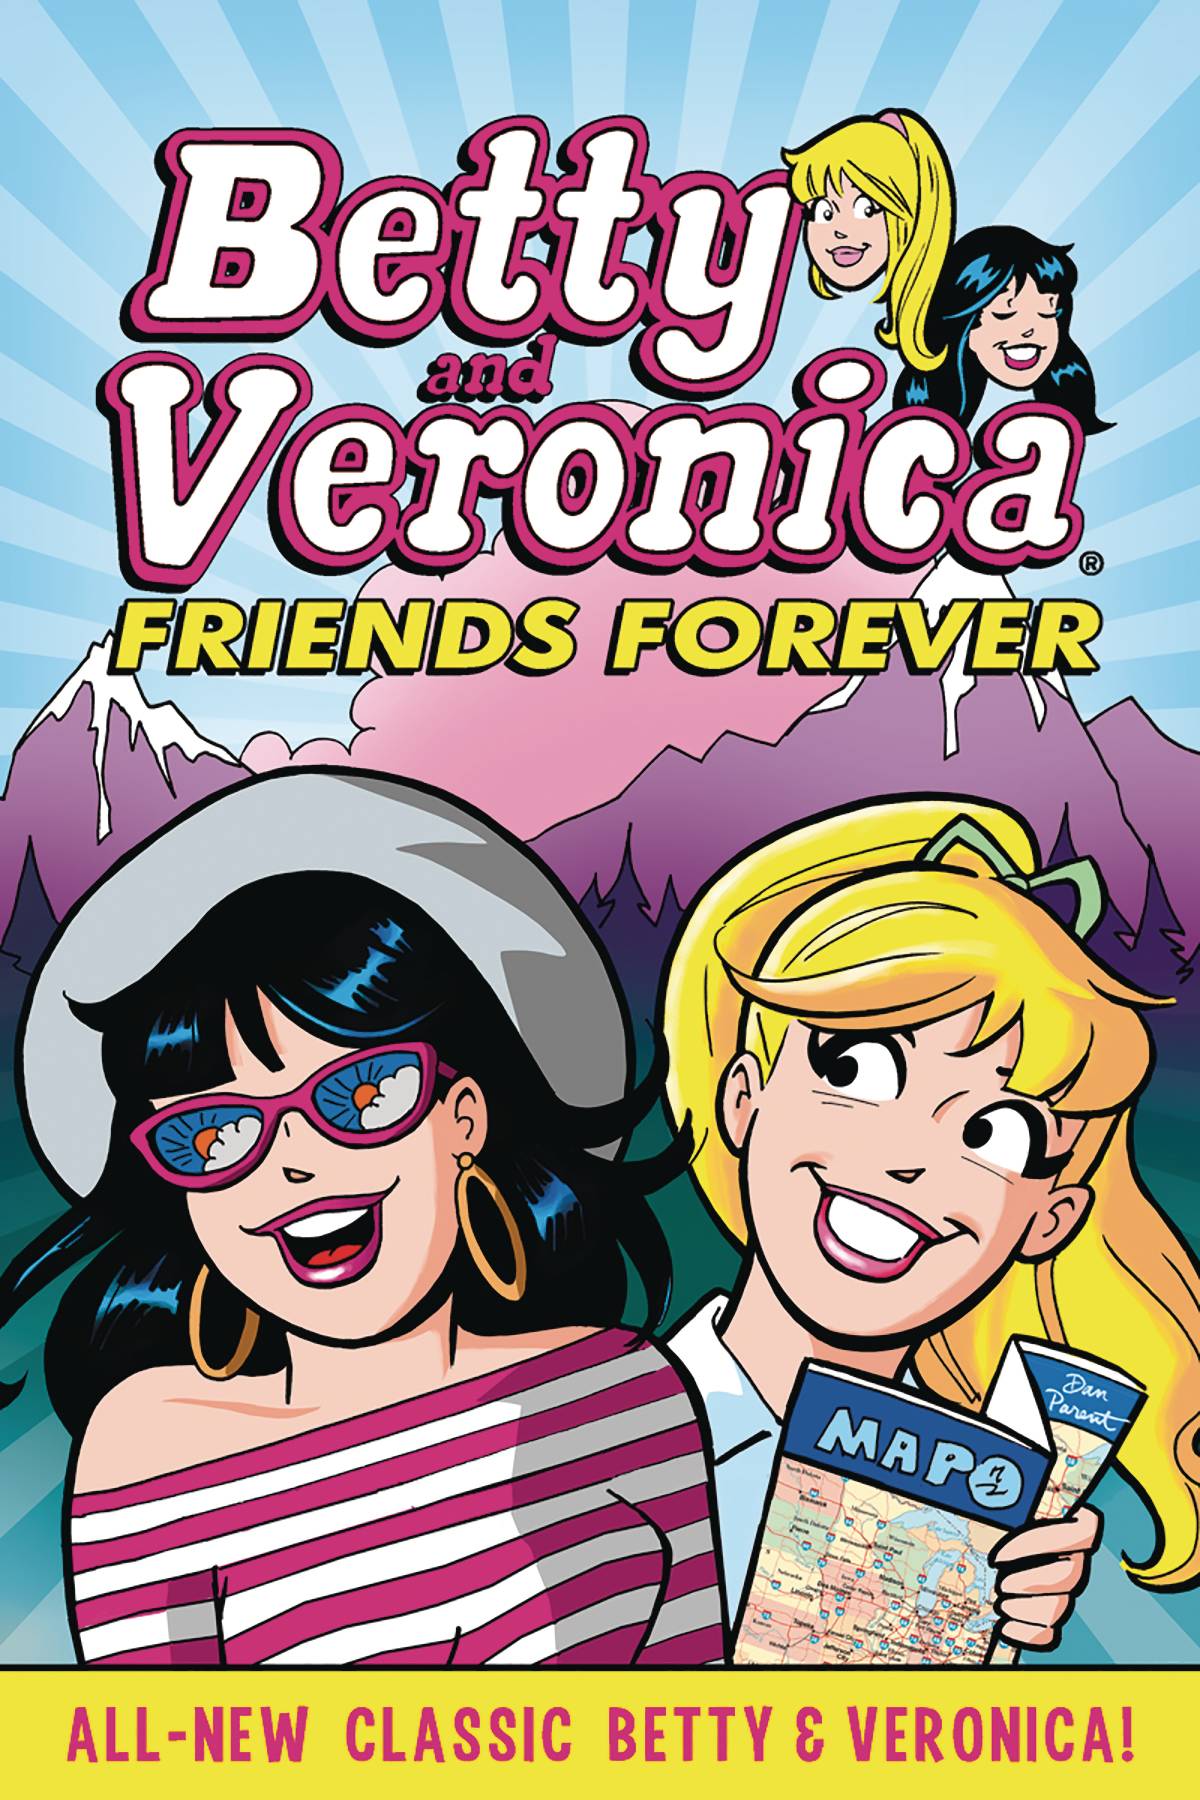 Betty & Veronica Friends Forever Graphic Novel